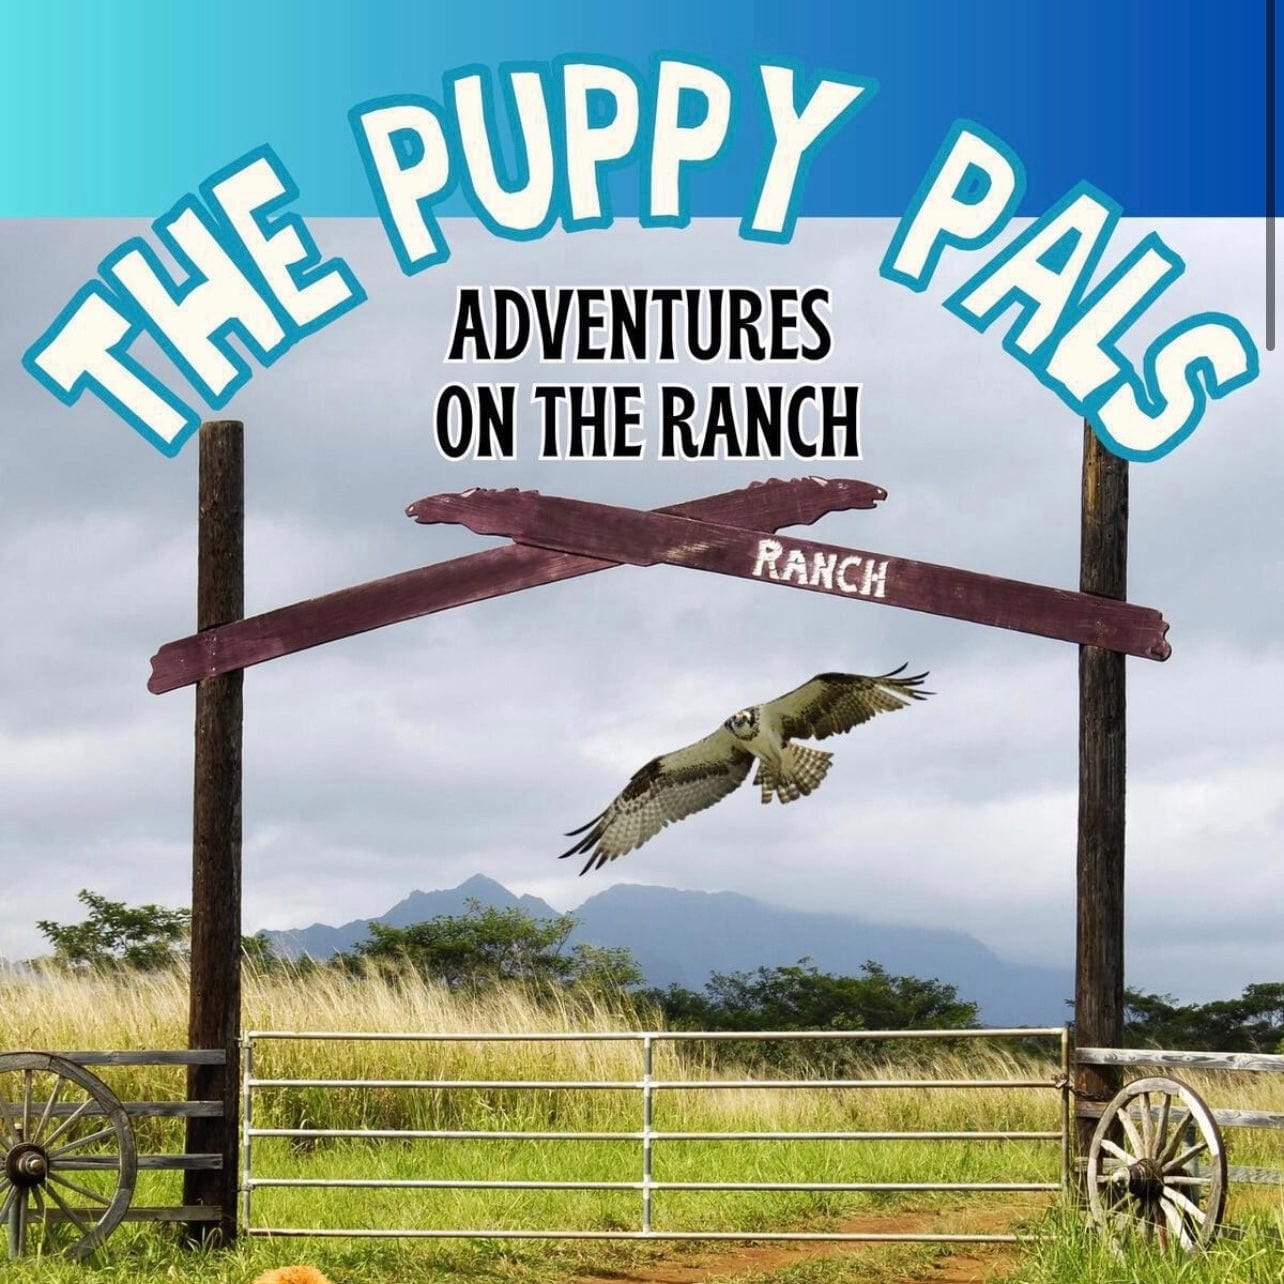 Spruced Roost PDF printable download The Puppy Pals Adventures on the Ranch